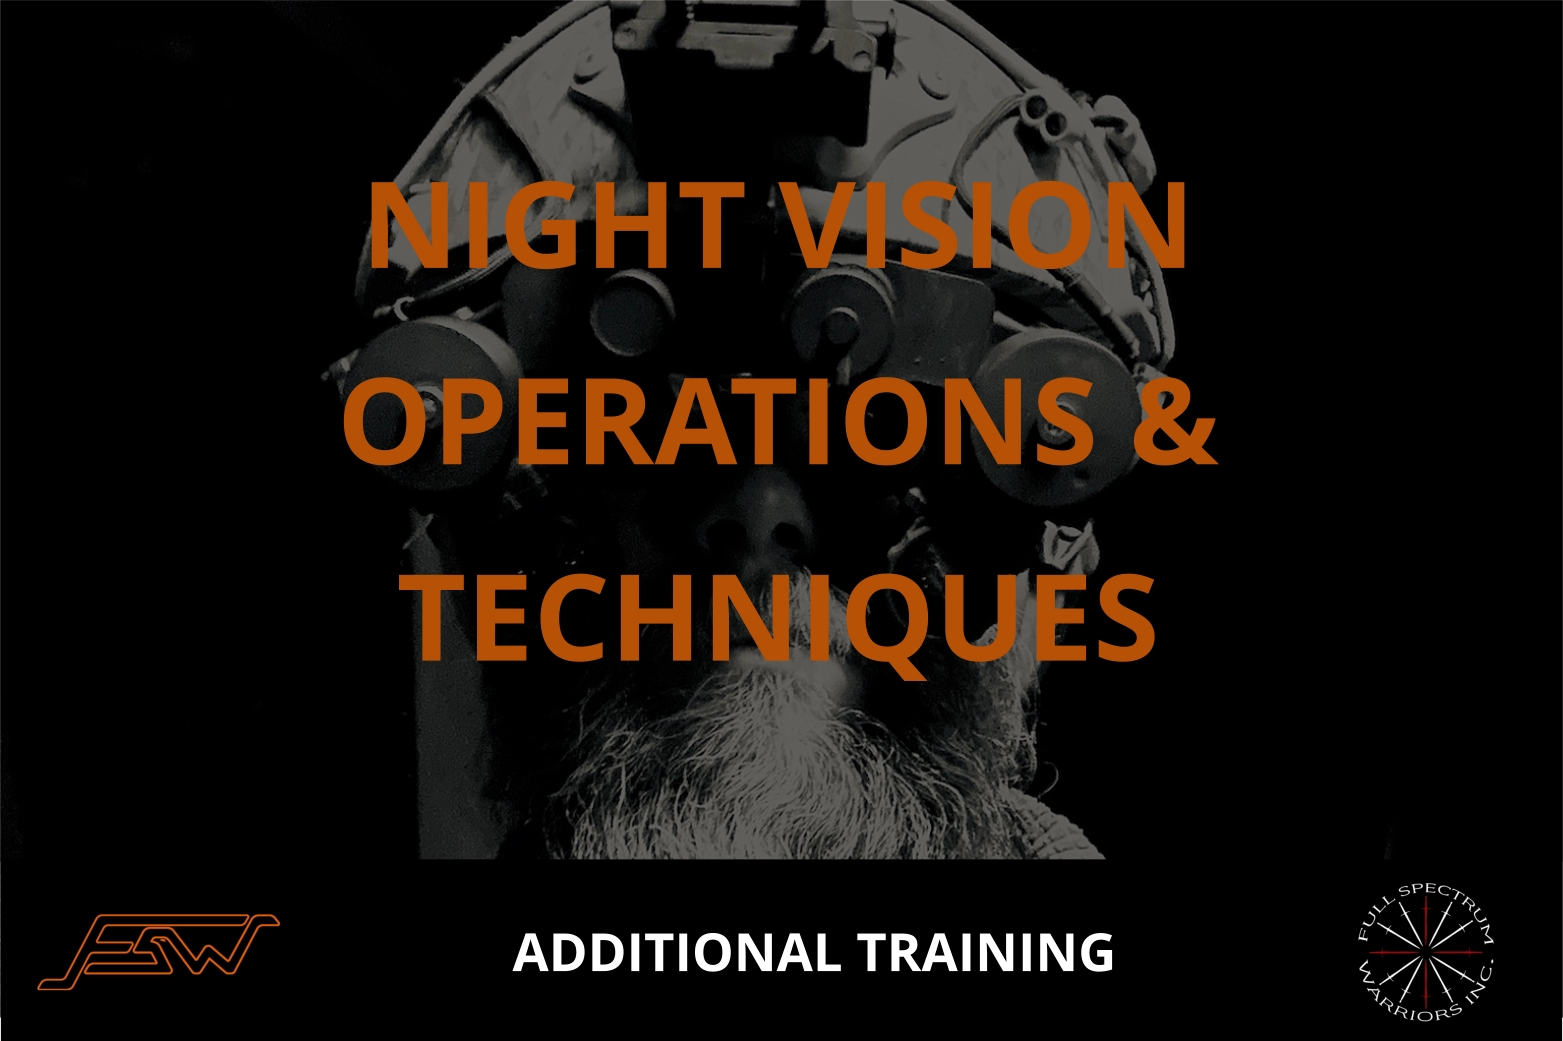 NIGHT VISIONS OPERATIONS & TECHNIQUES